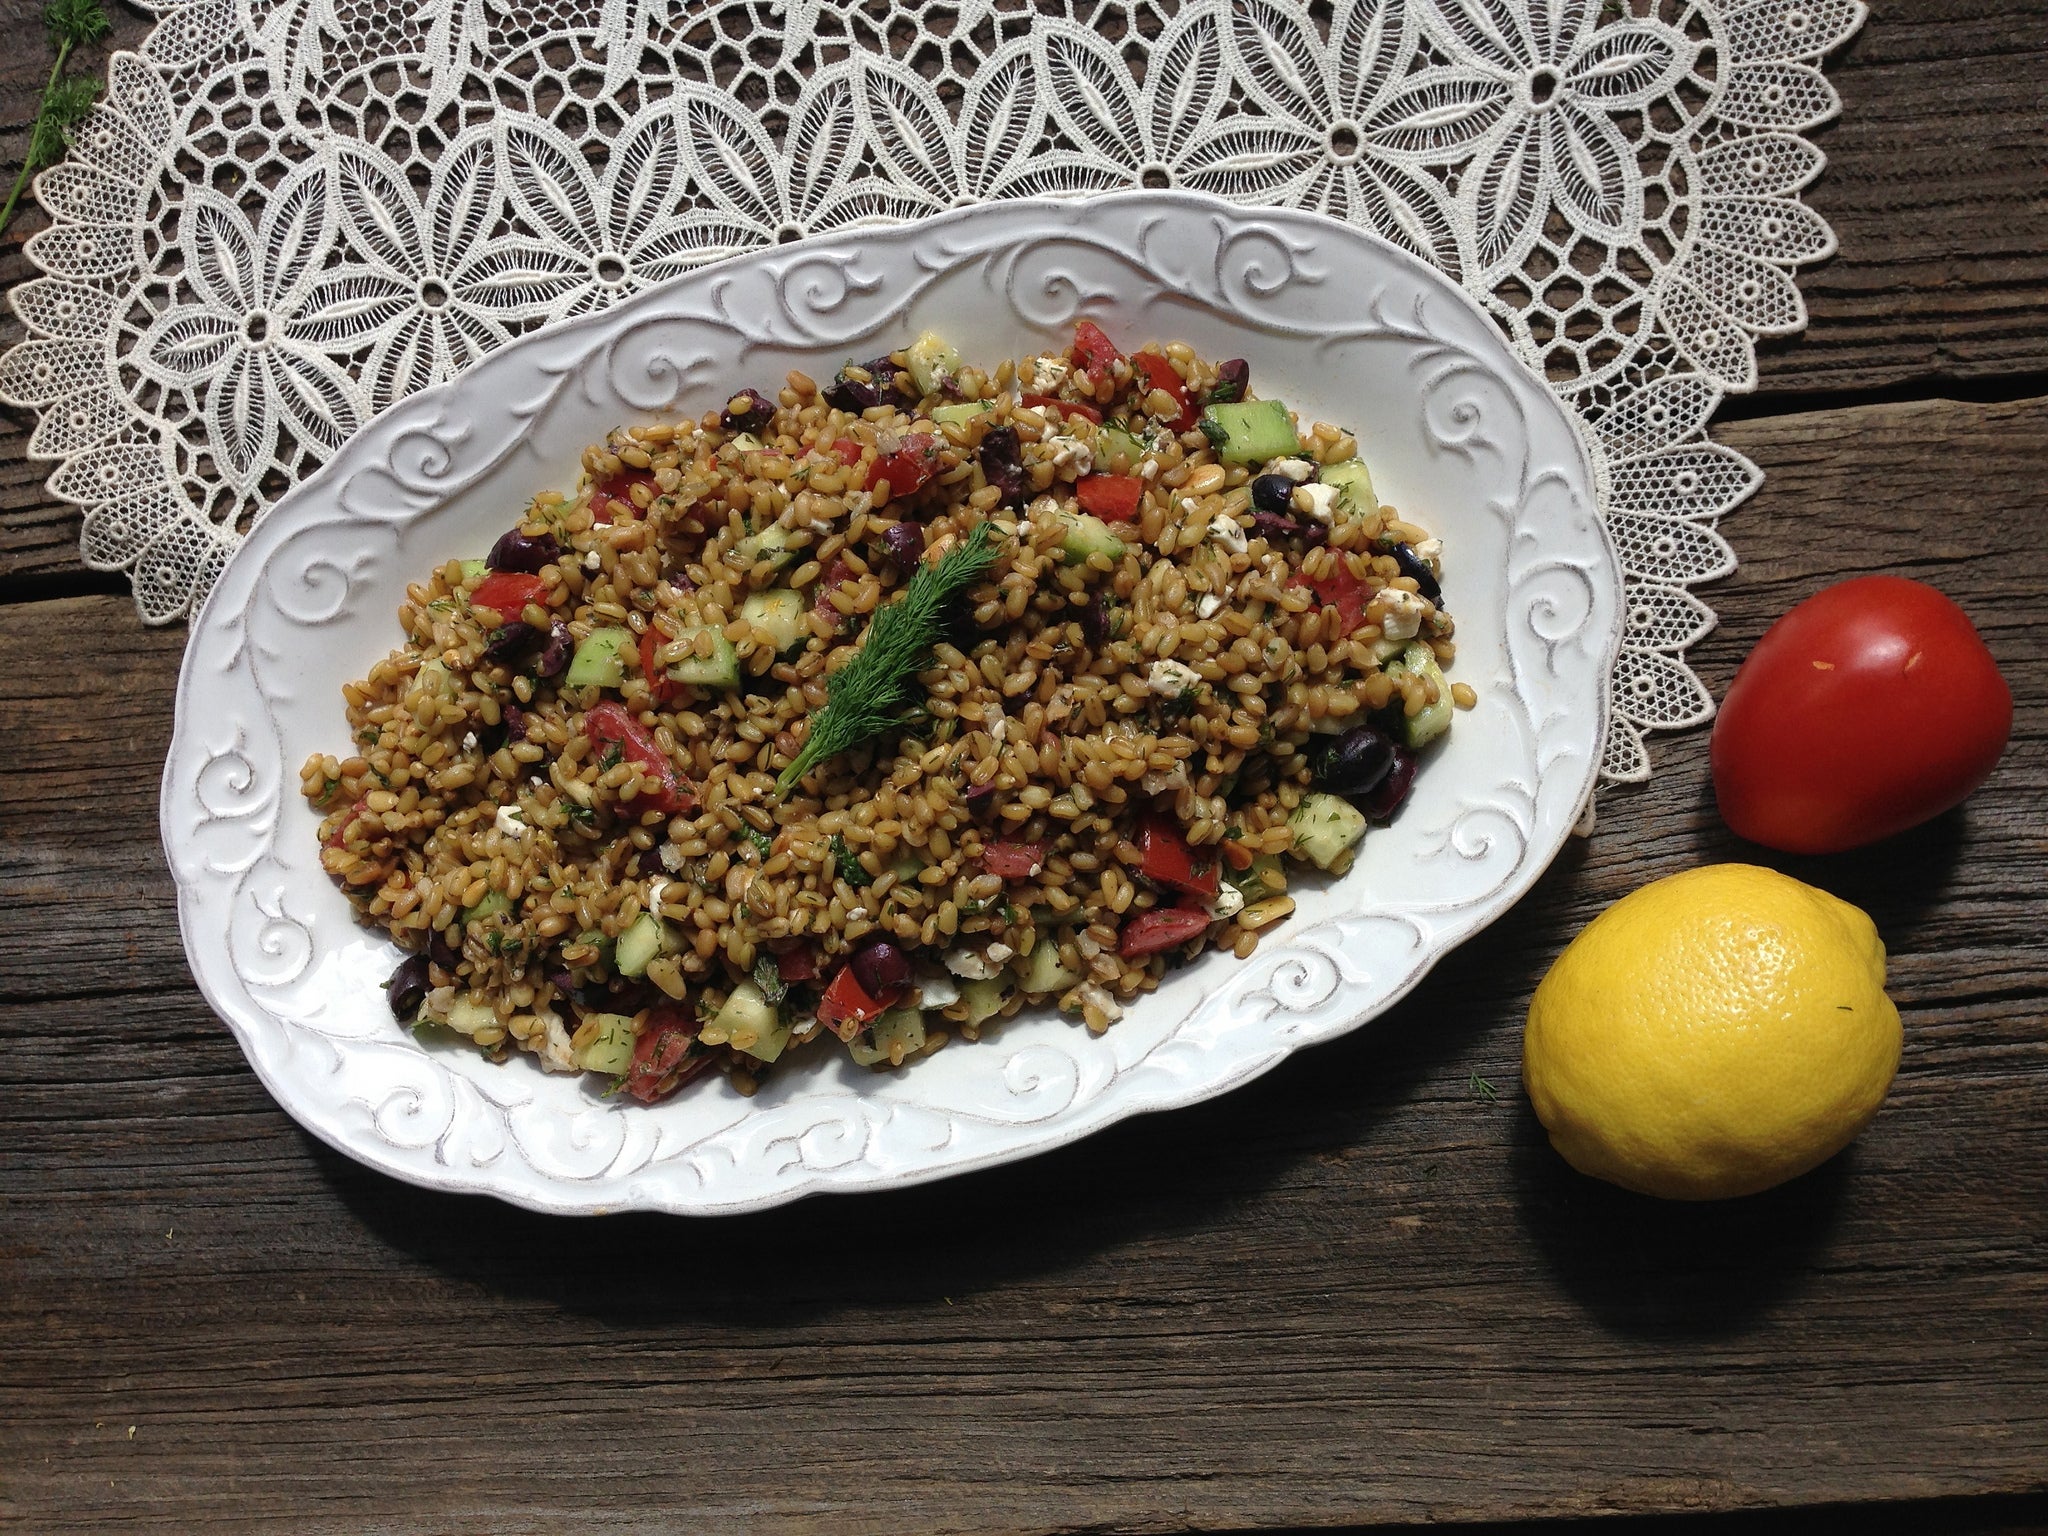 You can use freekeh in healthy salads, wraps and soups - as well as many other dishes